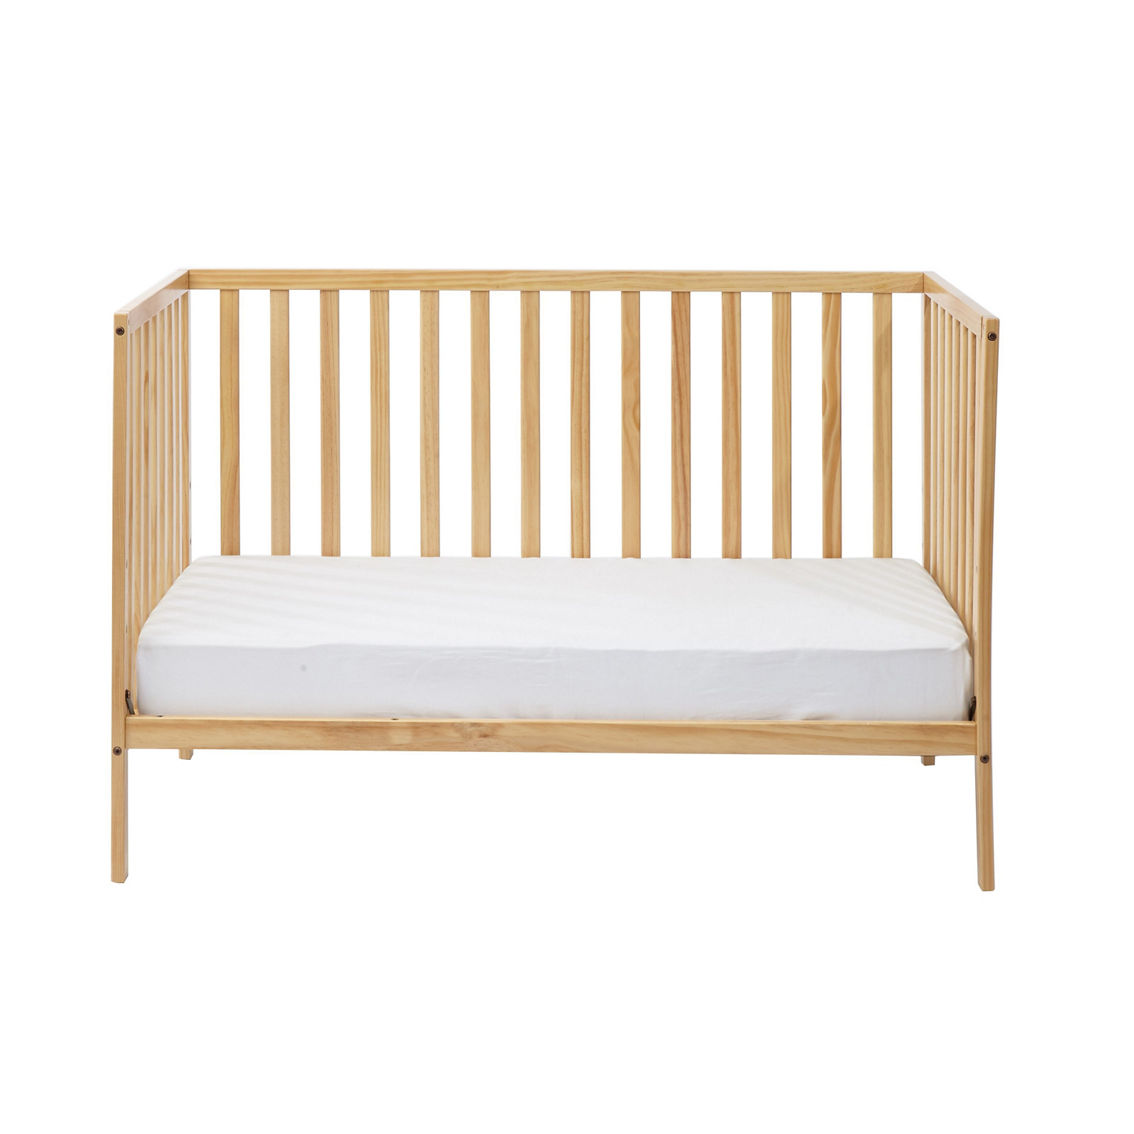 Suite Bebe Palmer 3-in-1 Convertible Island Crib Natural - Image 5 of 5